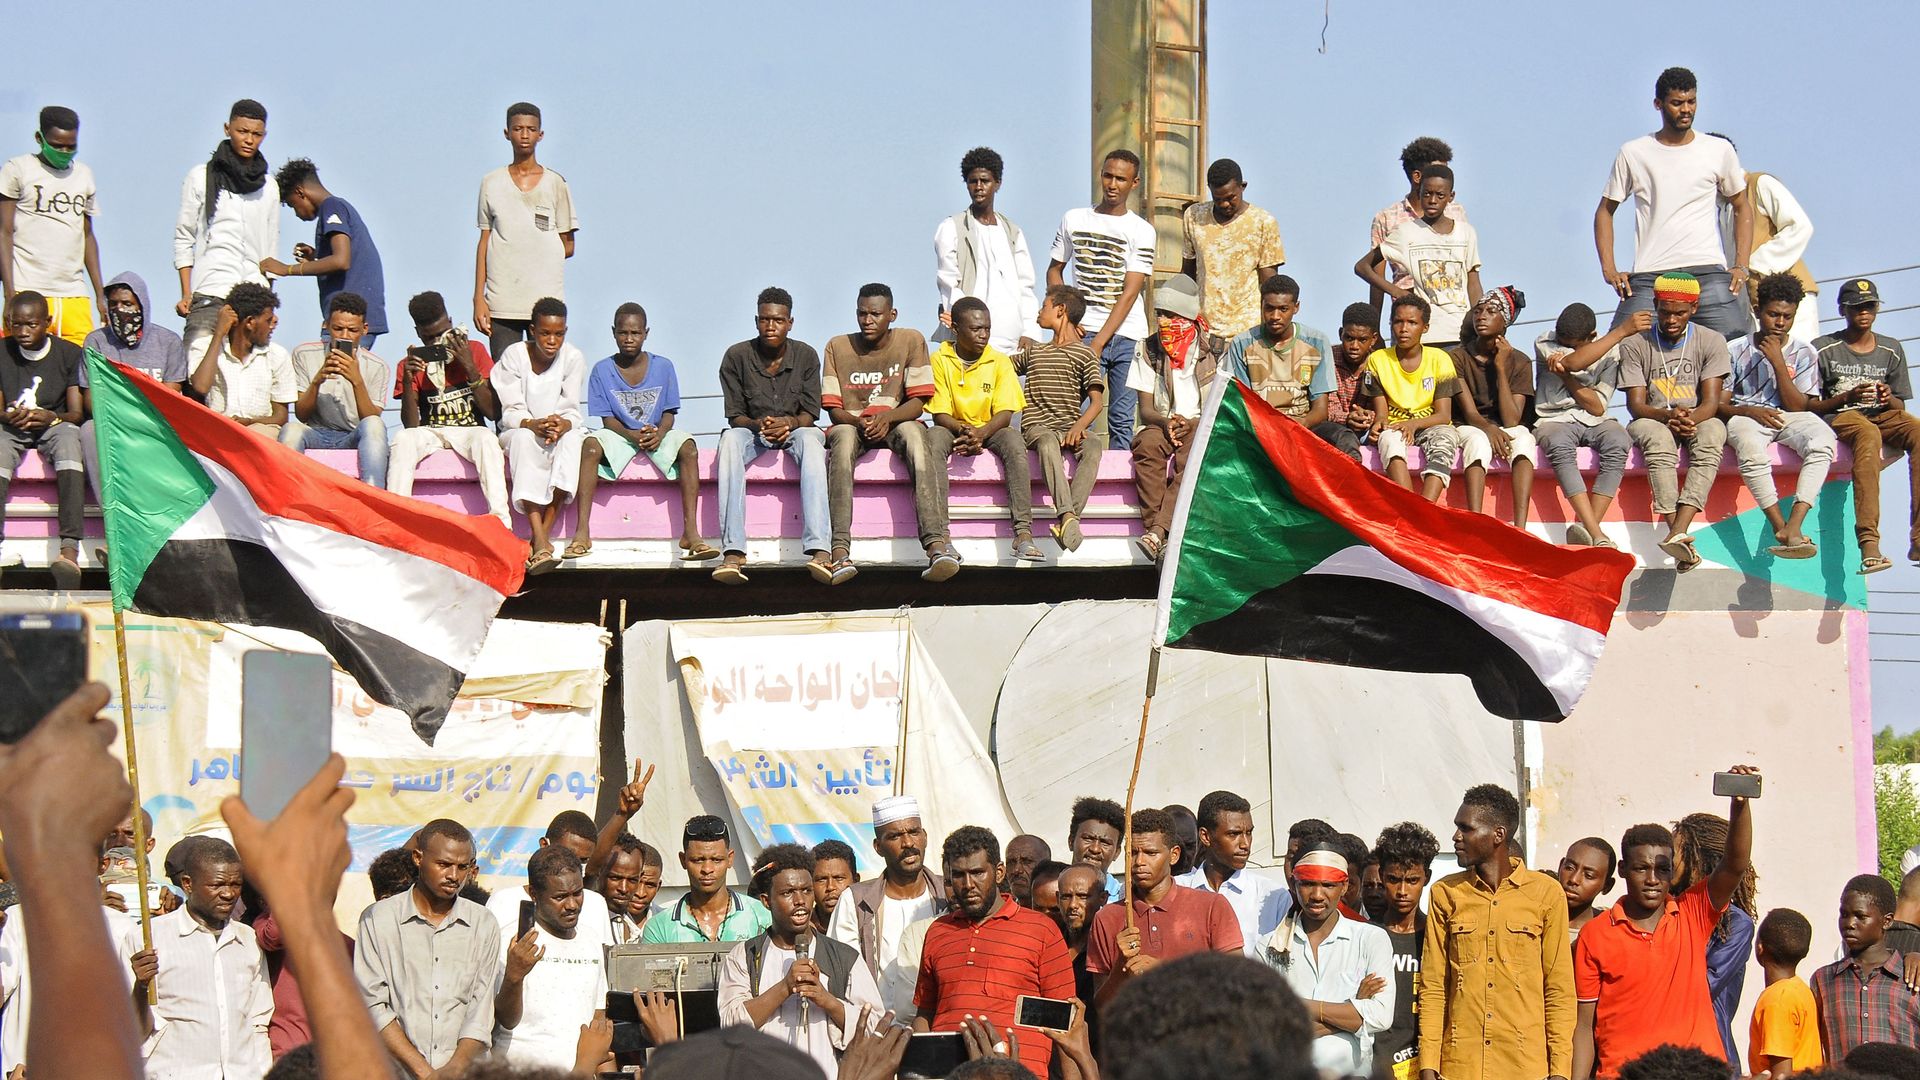 Sudanese protesters take part in a protest in Port Sudan in the east of the country to demand the government's transition to civilian rule, on October 21, 2021.